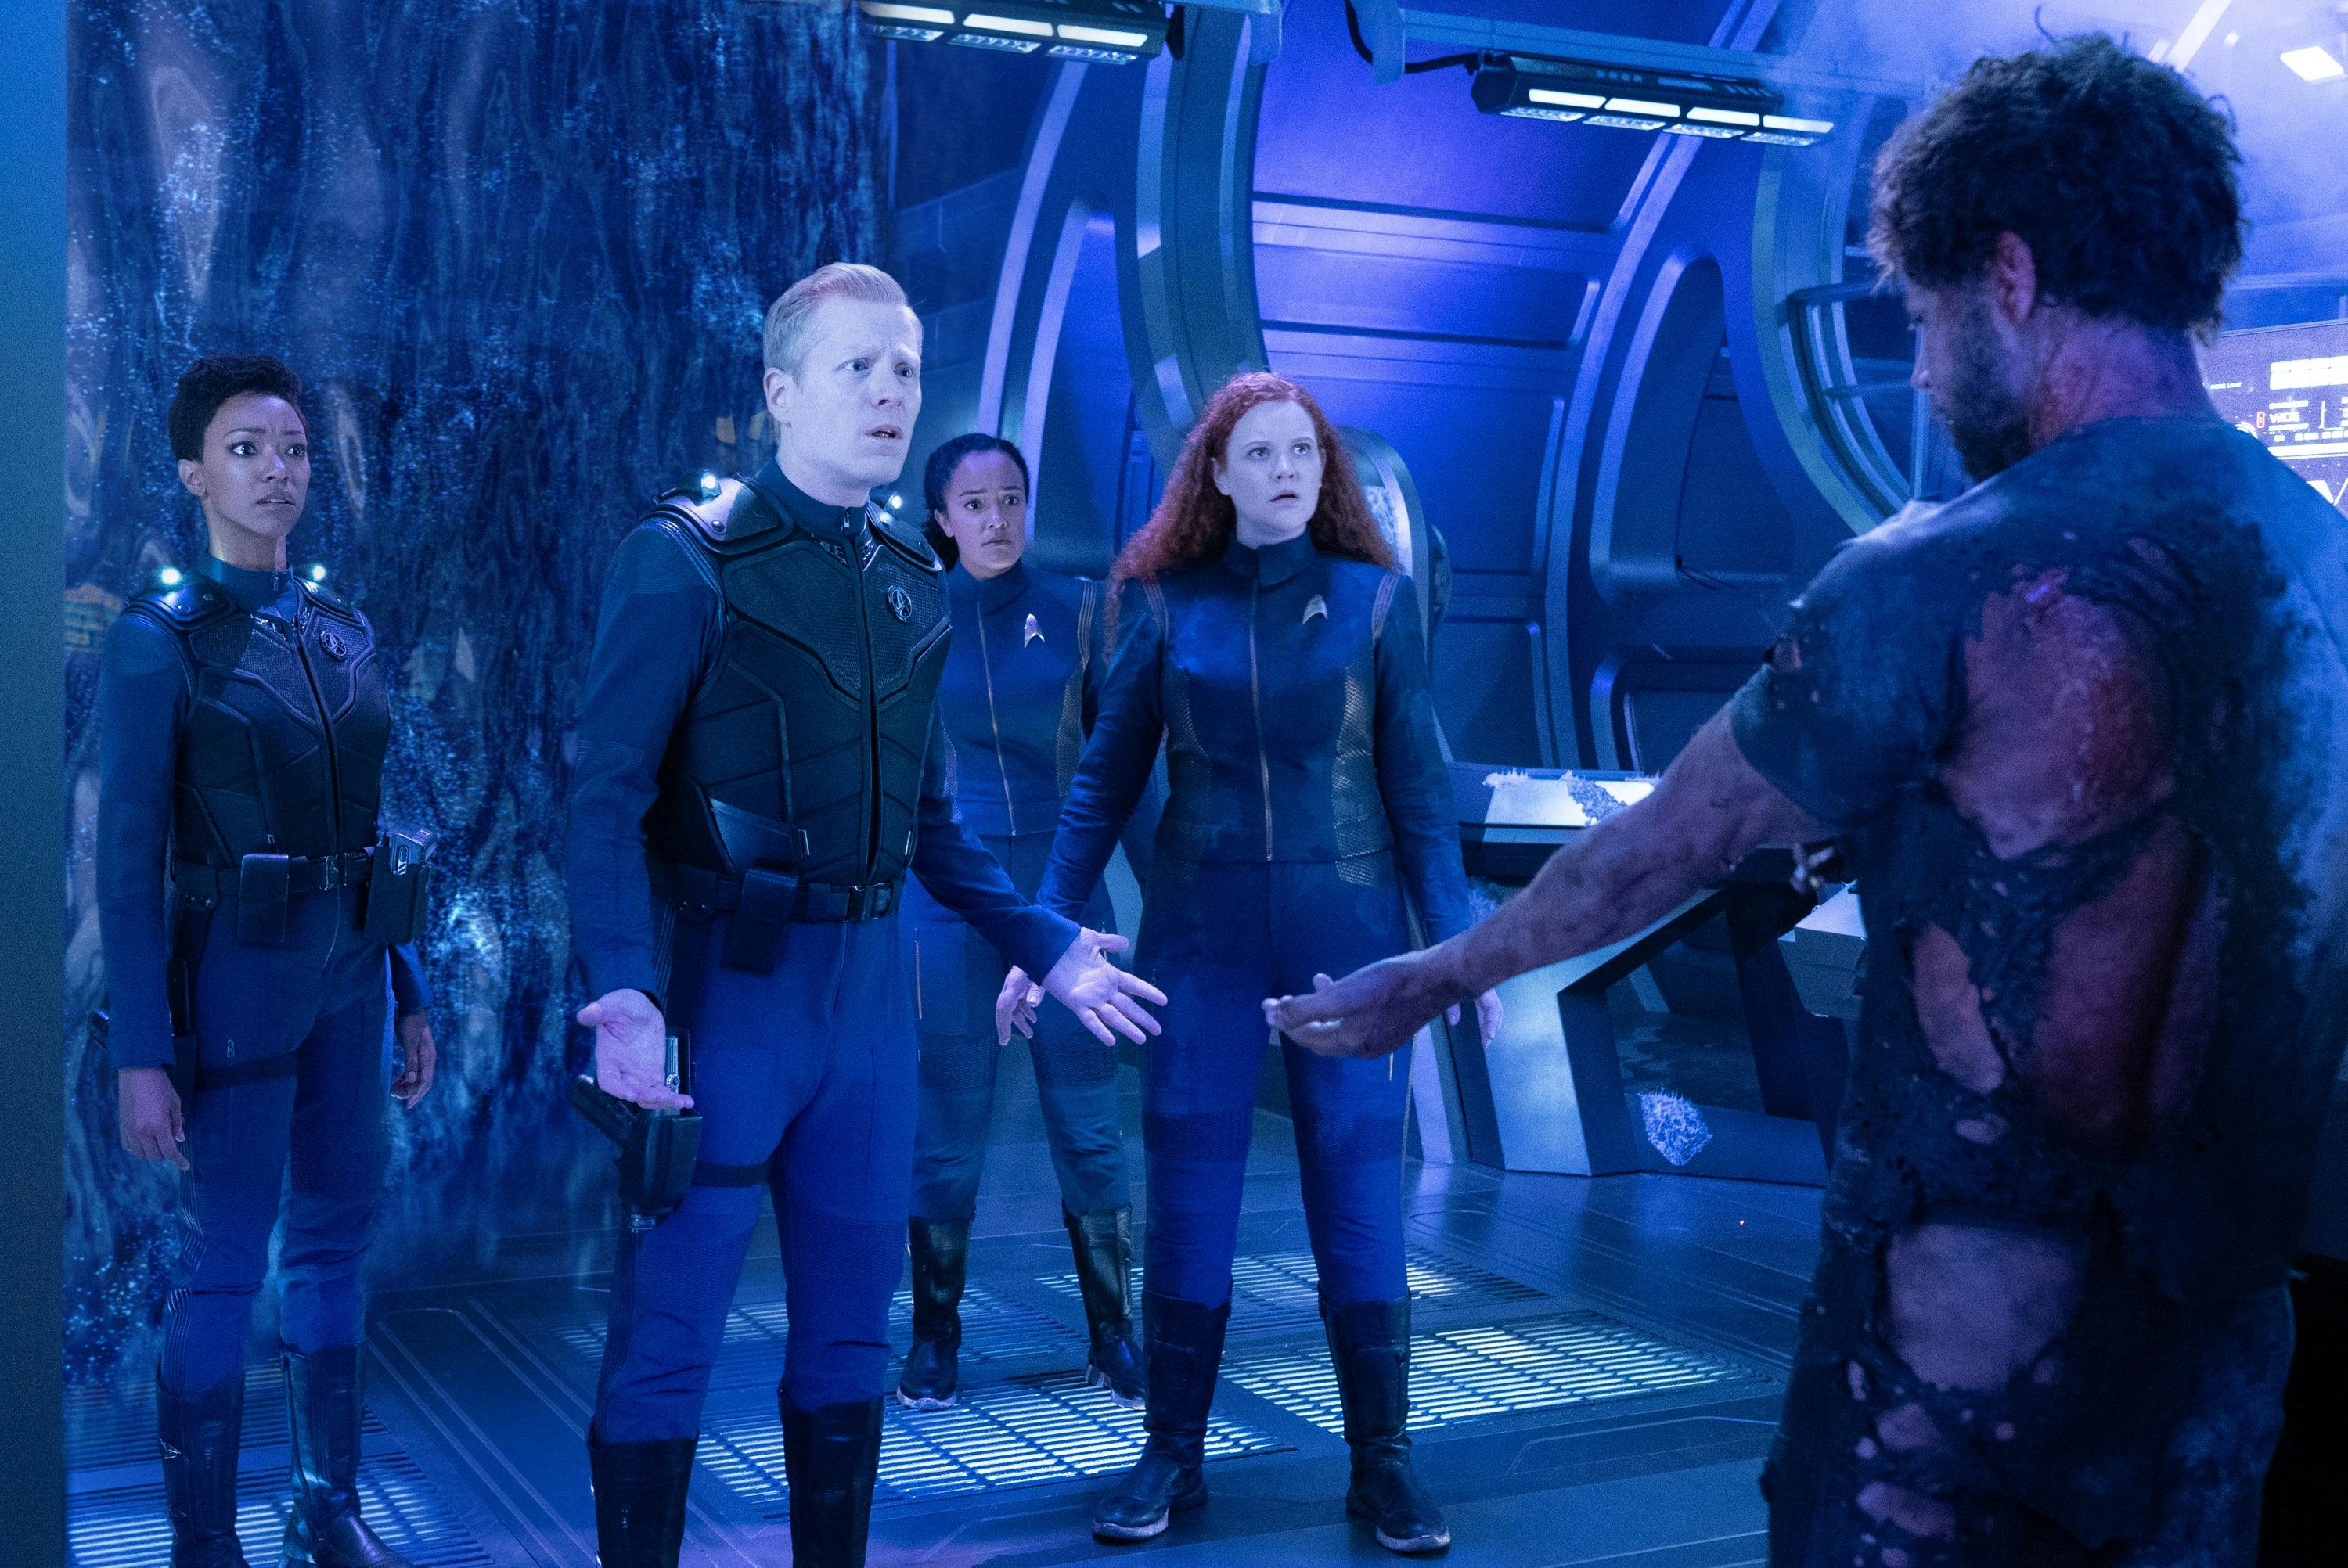 Burnham, Stamets, and Tilly all stare in disbelief that the mycelial network recreated Culber in Star Trek: Discovery